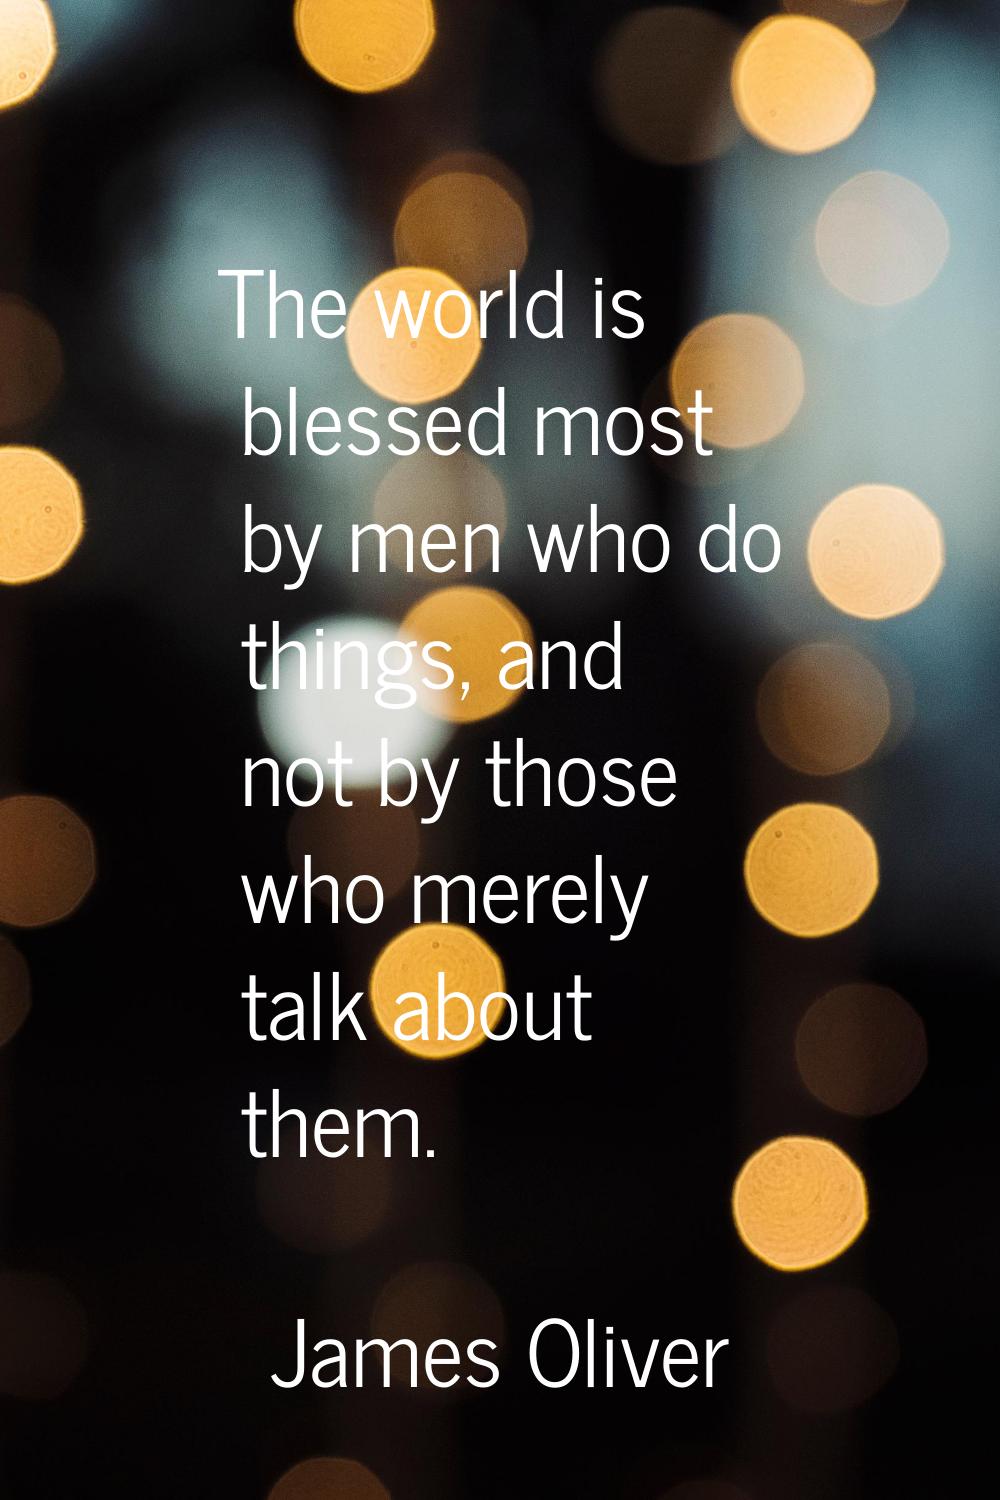 The world is blessed most by men who do things, and not by those who merely talk about them.